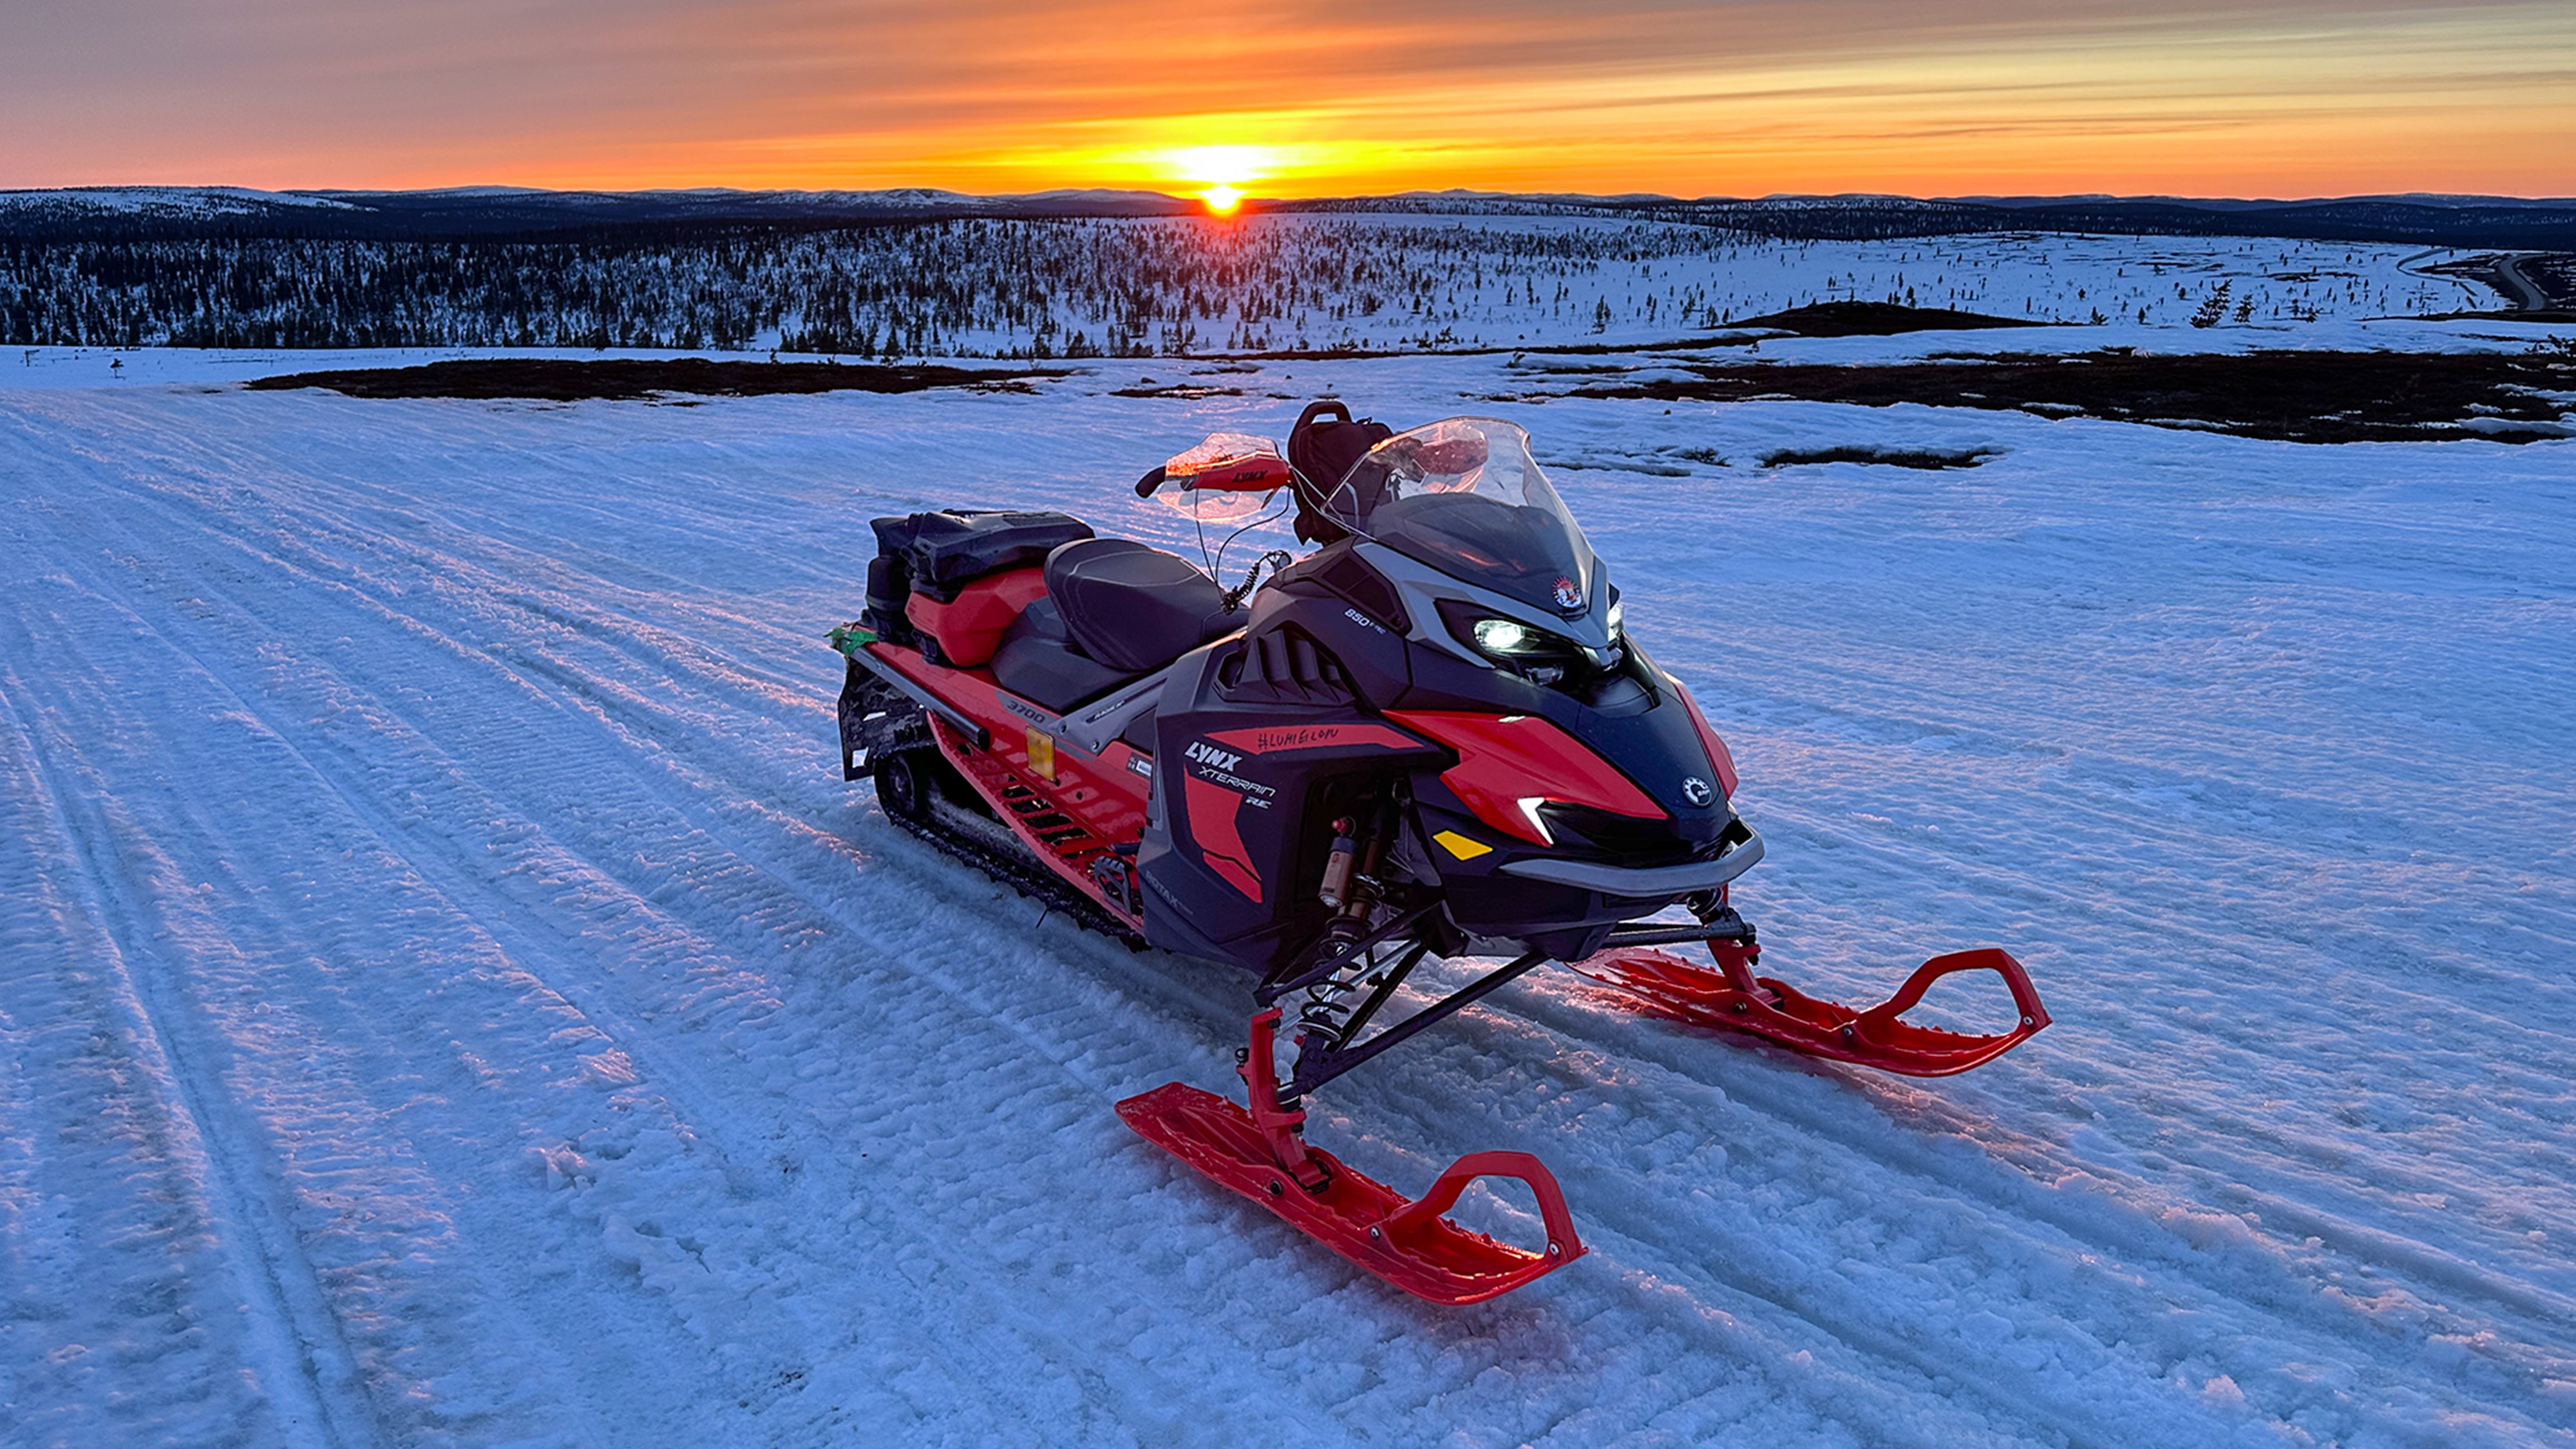 Lynx Xterrain RE 850 E-TEC crossover snowmobile parked on a trail at highlands